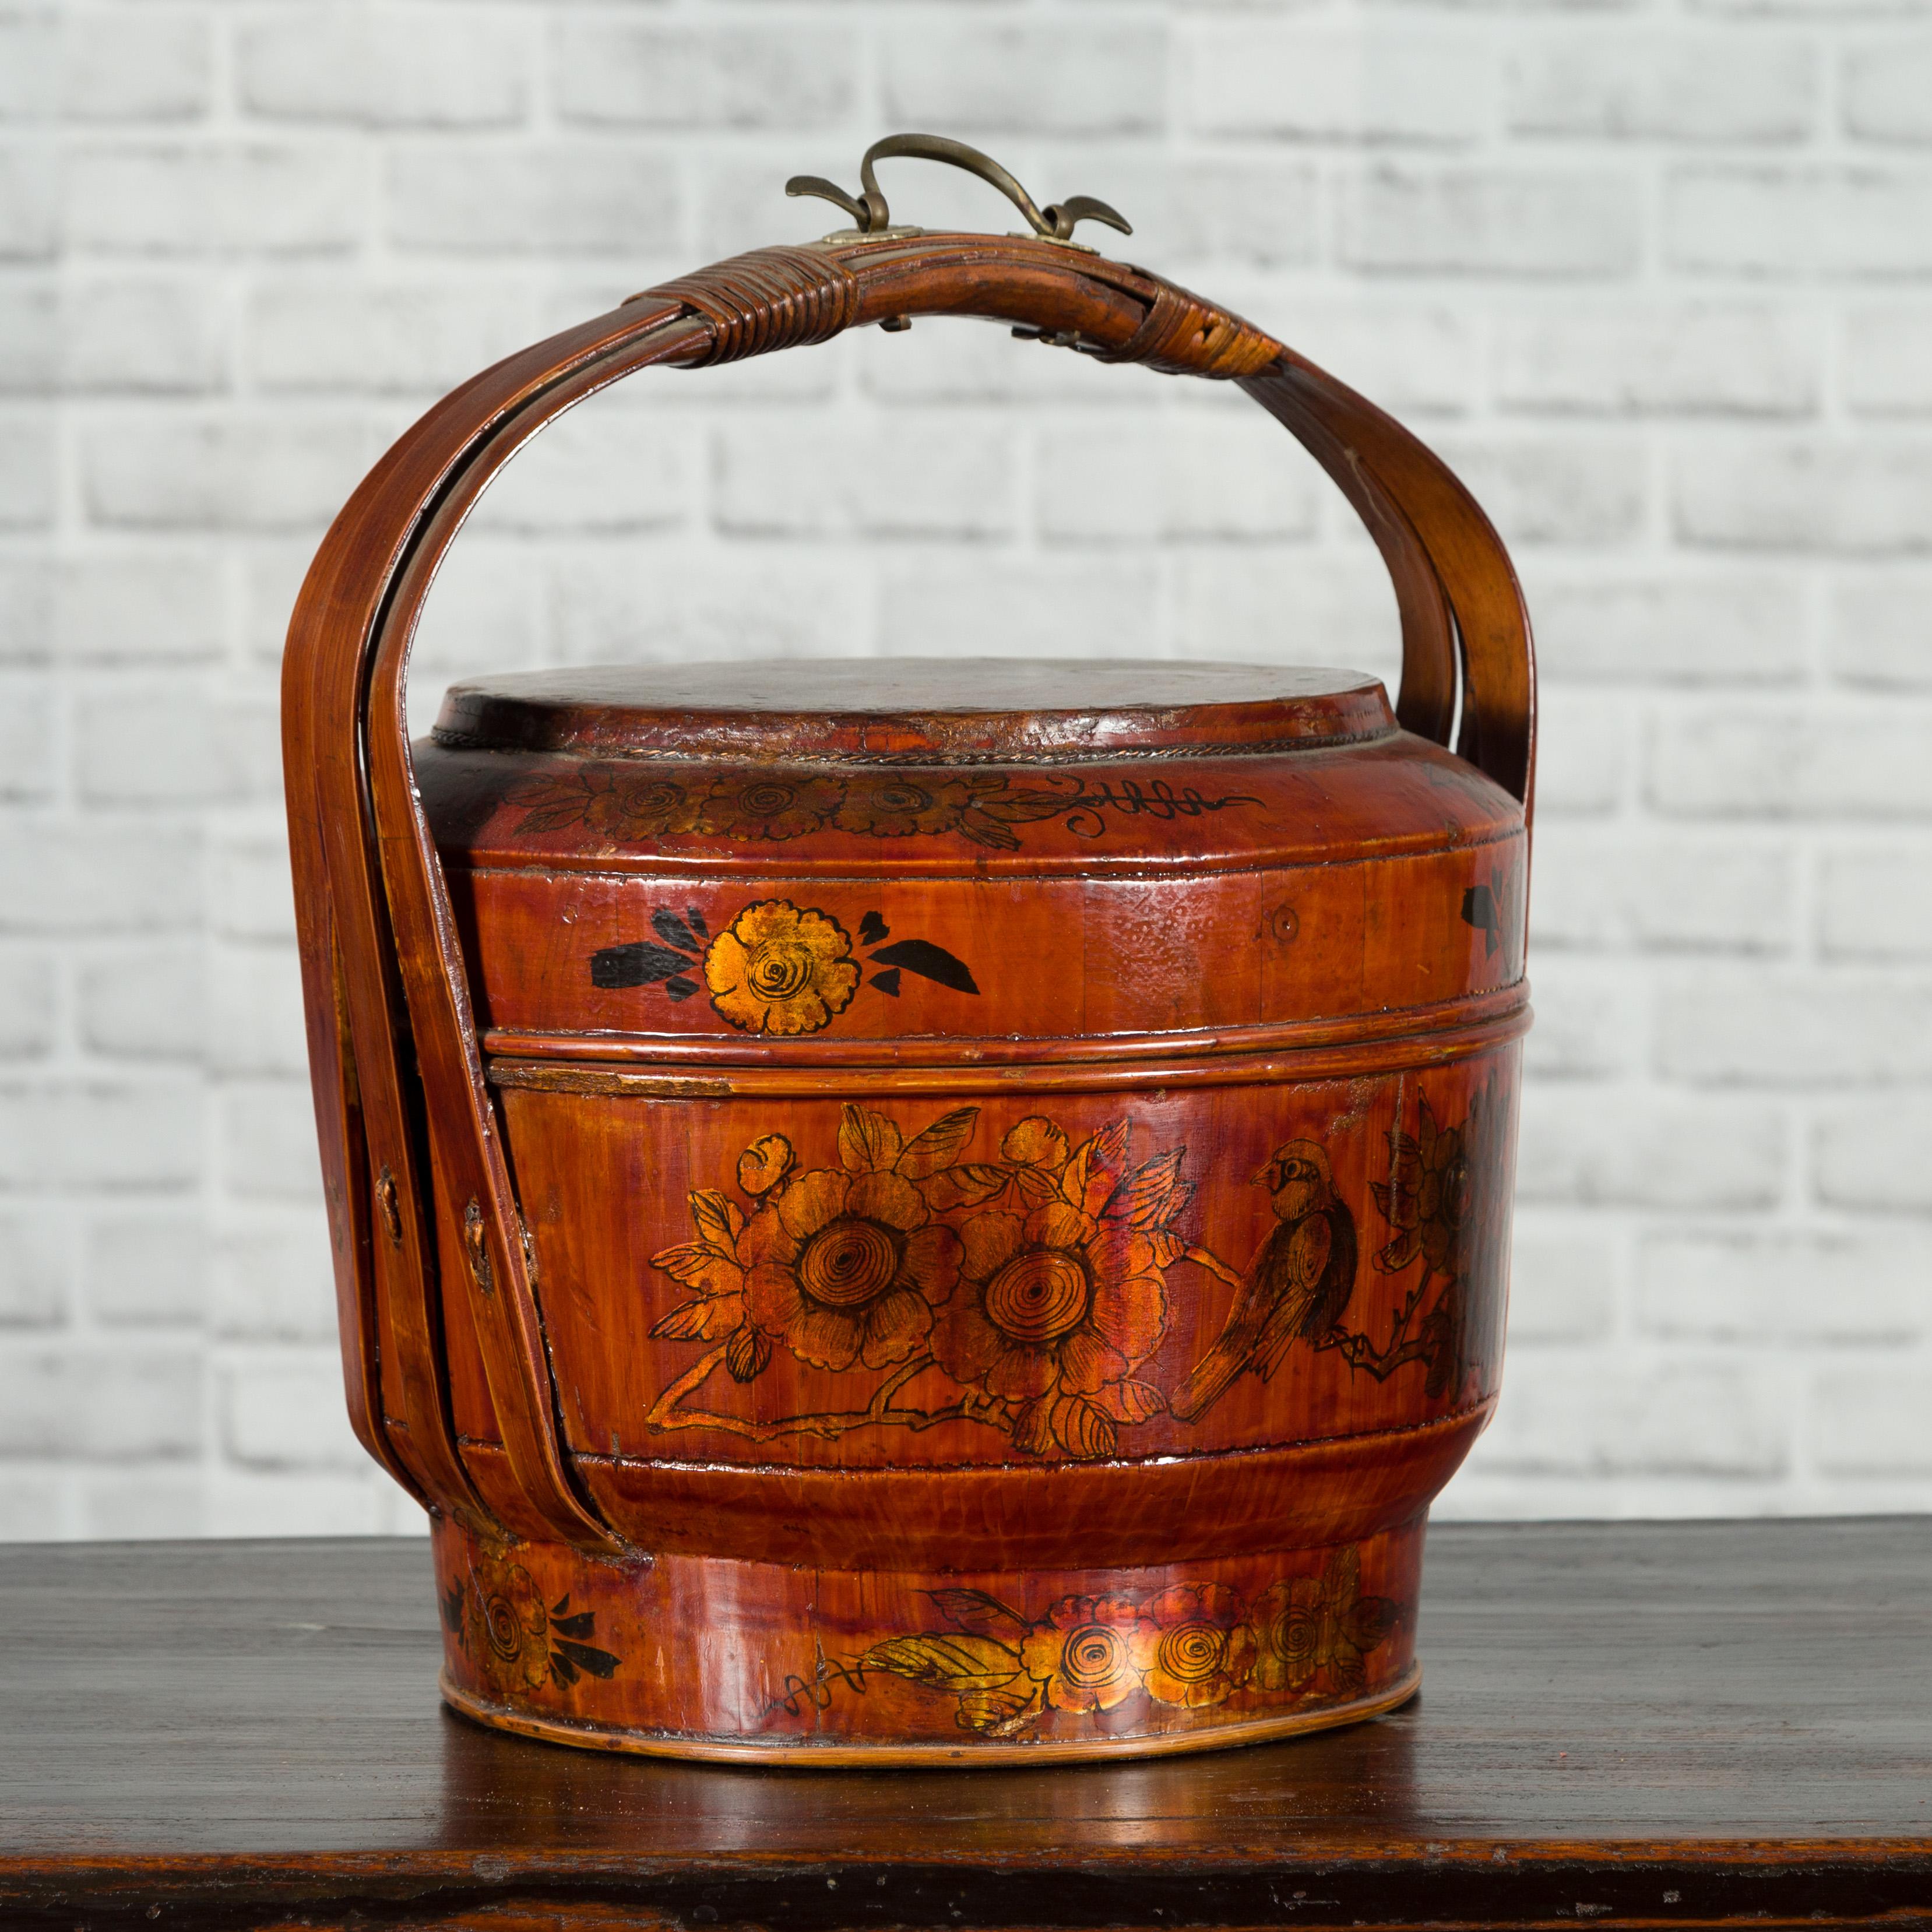 A Chinese picnic basket from the early 20th century, with large handle and painted motifs. Created in China during the early years of the 20th century, this picnic basket features a lacquered body adorned with painted motifs depicting showcasing